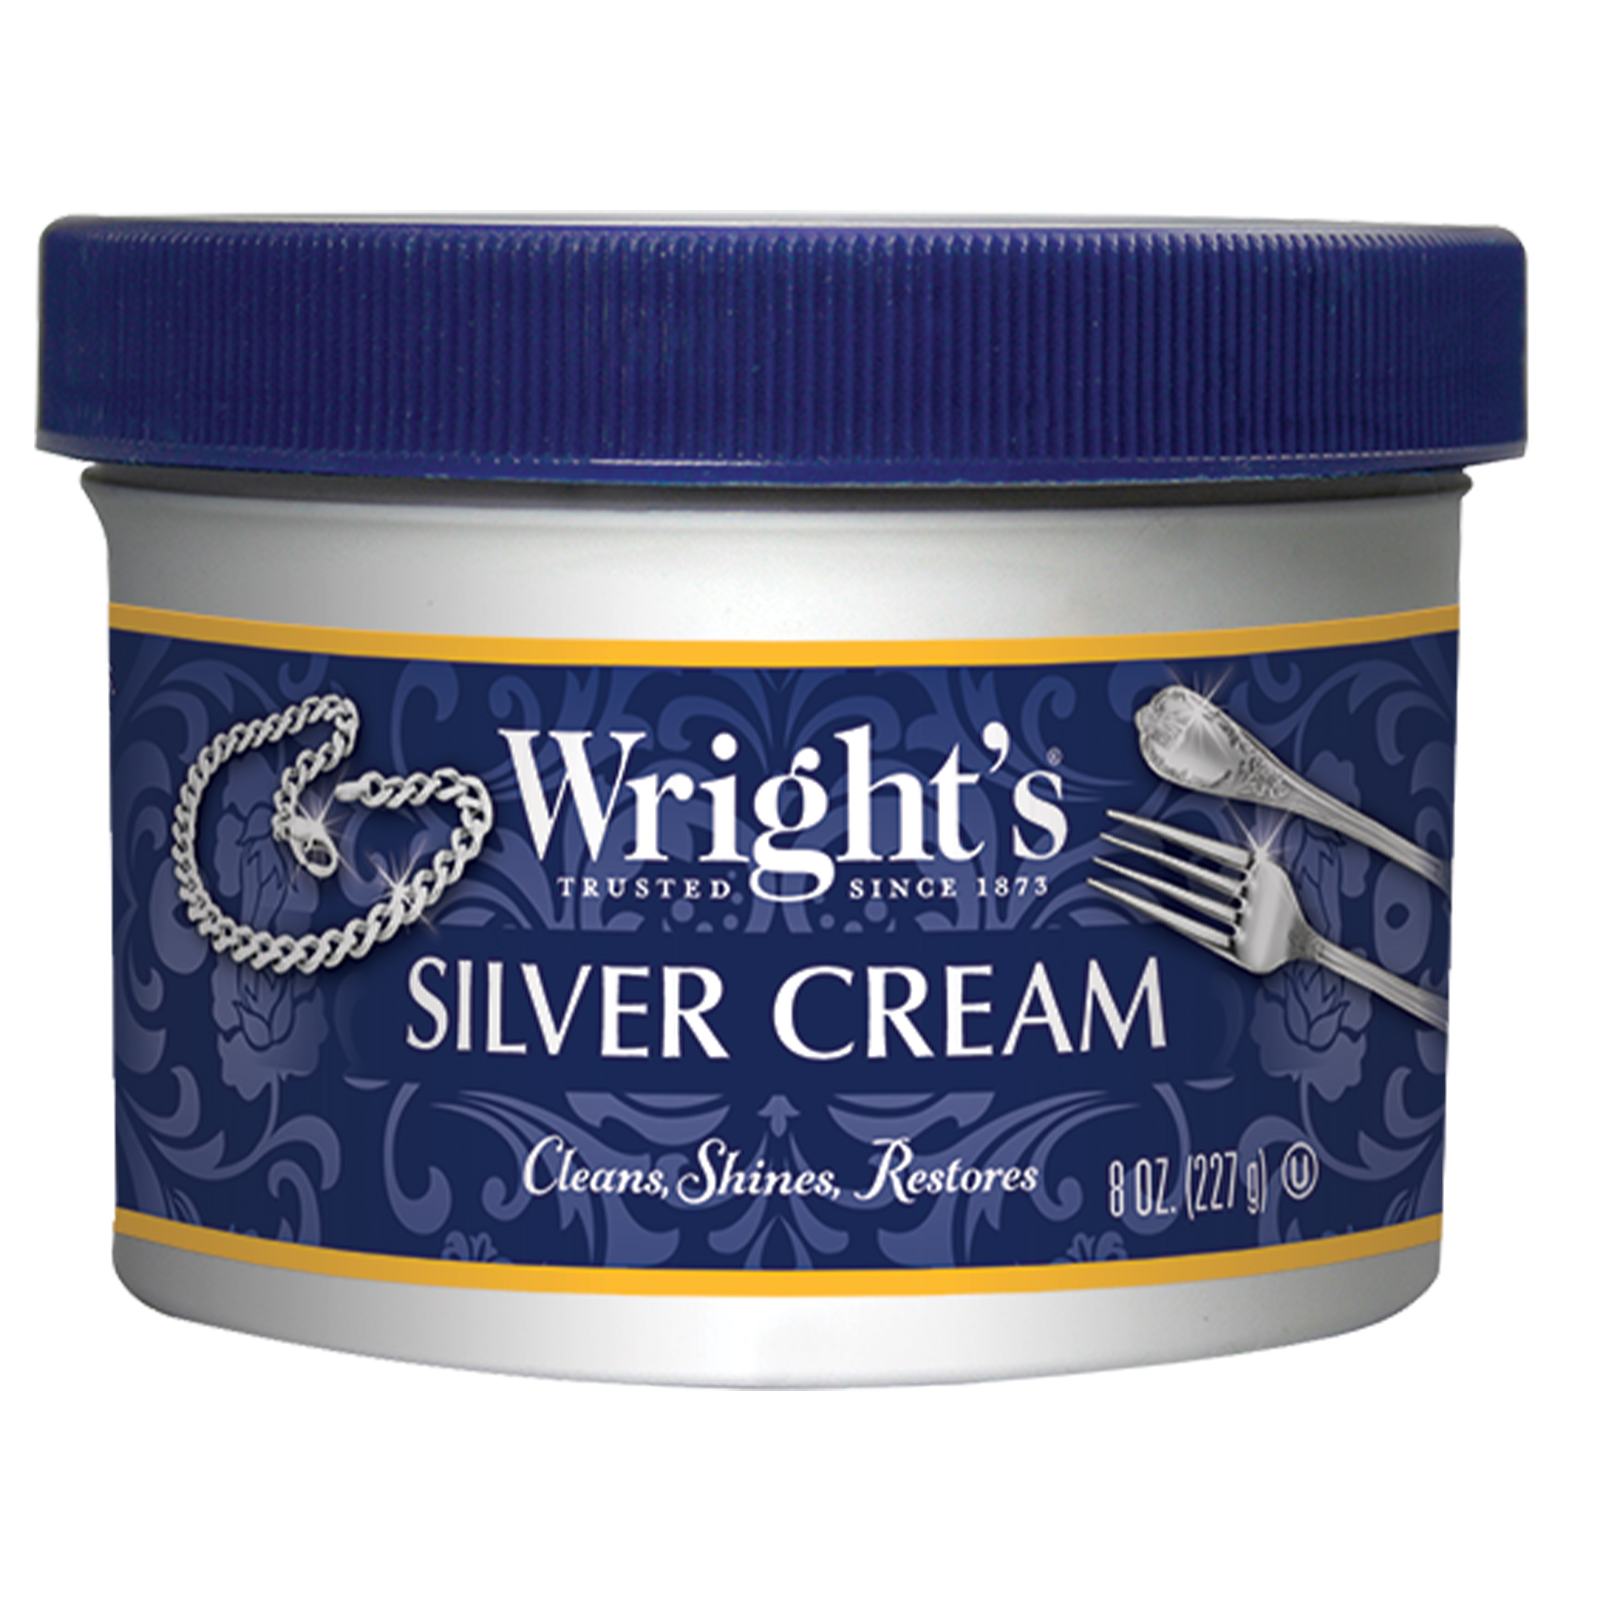 Wright's Silver and Metal Polish Cleaner - Removes Tarnish from Silver, 8 oz, Unscented - image 1 of 7